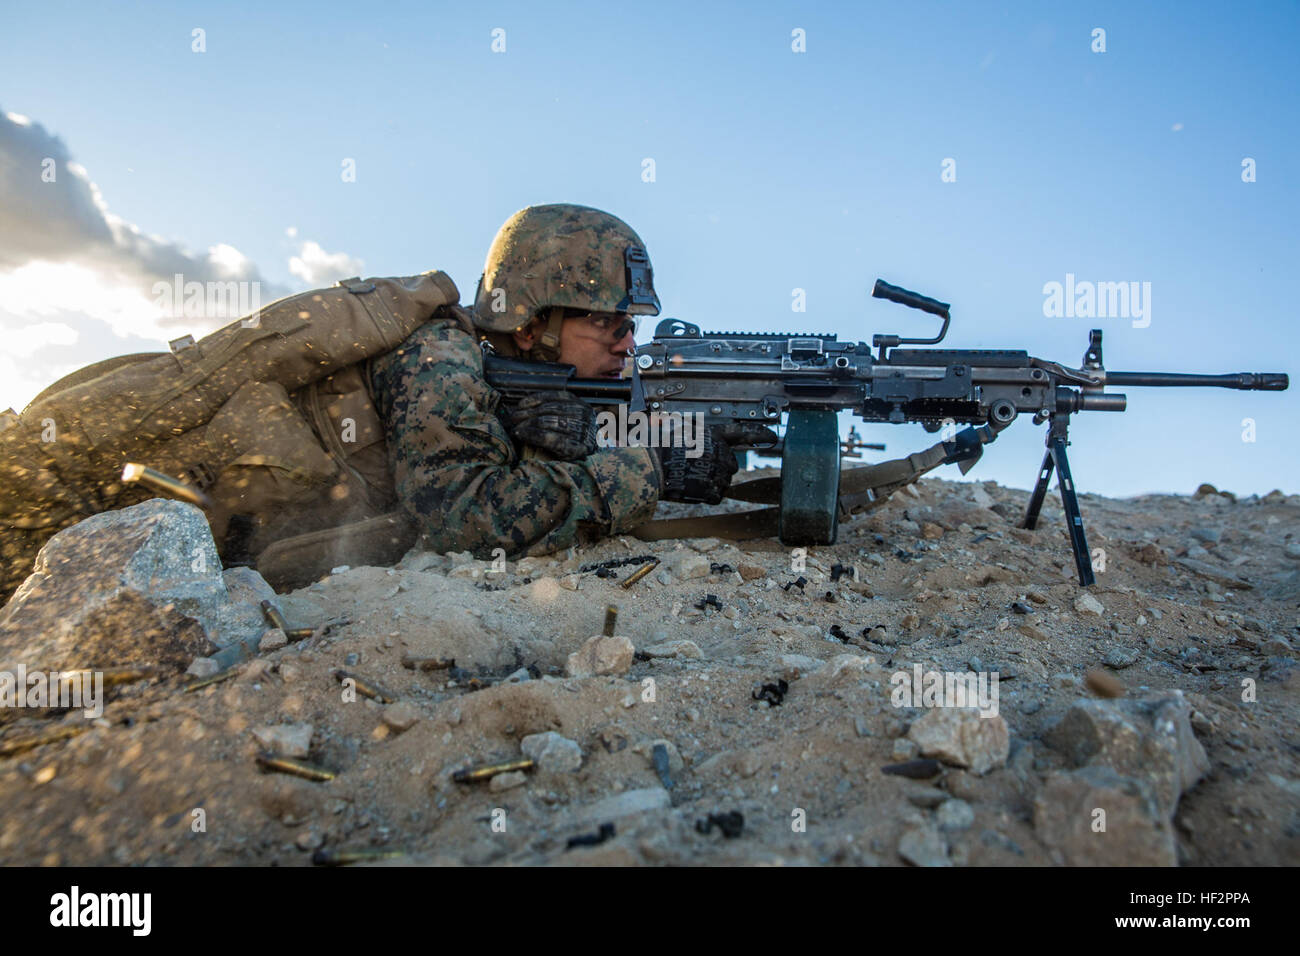 U.S. Marine Pfc. Andres Bravo engages targets during a combined arms exercise aboard Marine Corps Air Ground Combat Center, Twentynine Palms, Calif., Dec. 13, 2014. Bravo is a rifleman with Battalion Landing Team 3rd Battalion, 1st Marine Regiment, 15th Marine Expeditionary Unit. BLT 3/1 conducted this training concurrent with the 15th MEU’s realistic urban training.  RUT prepares the 15th MEU’s Marines for their upcoming deployment, enhancing their combat skills in environments similar to those they may find in future missions. (U.S. Marine Corps Photo by Sgt. Emmanuel Ramos/Released) 15th ME Stock Photo